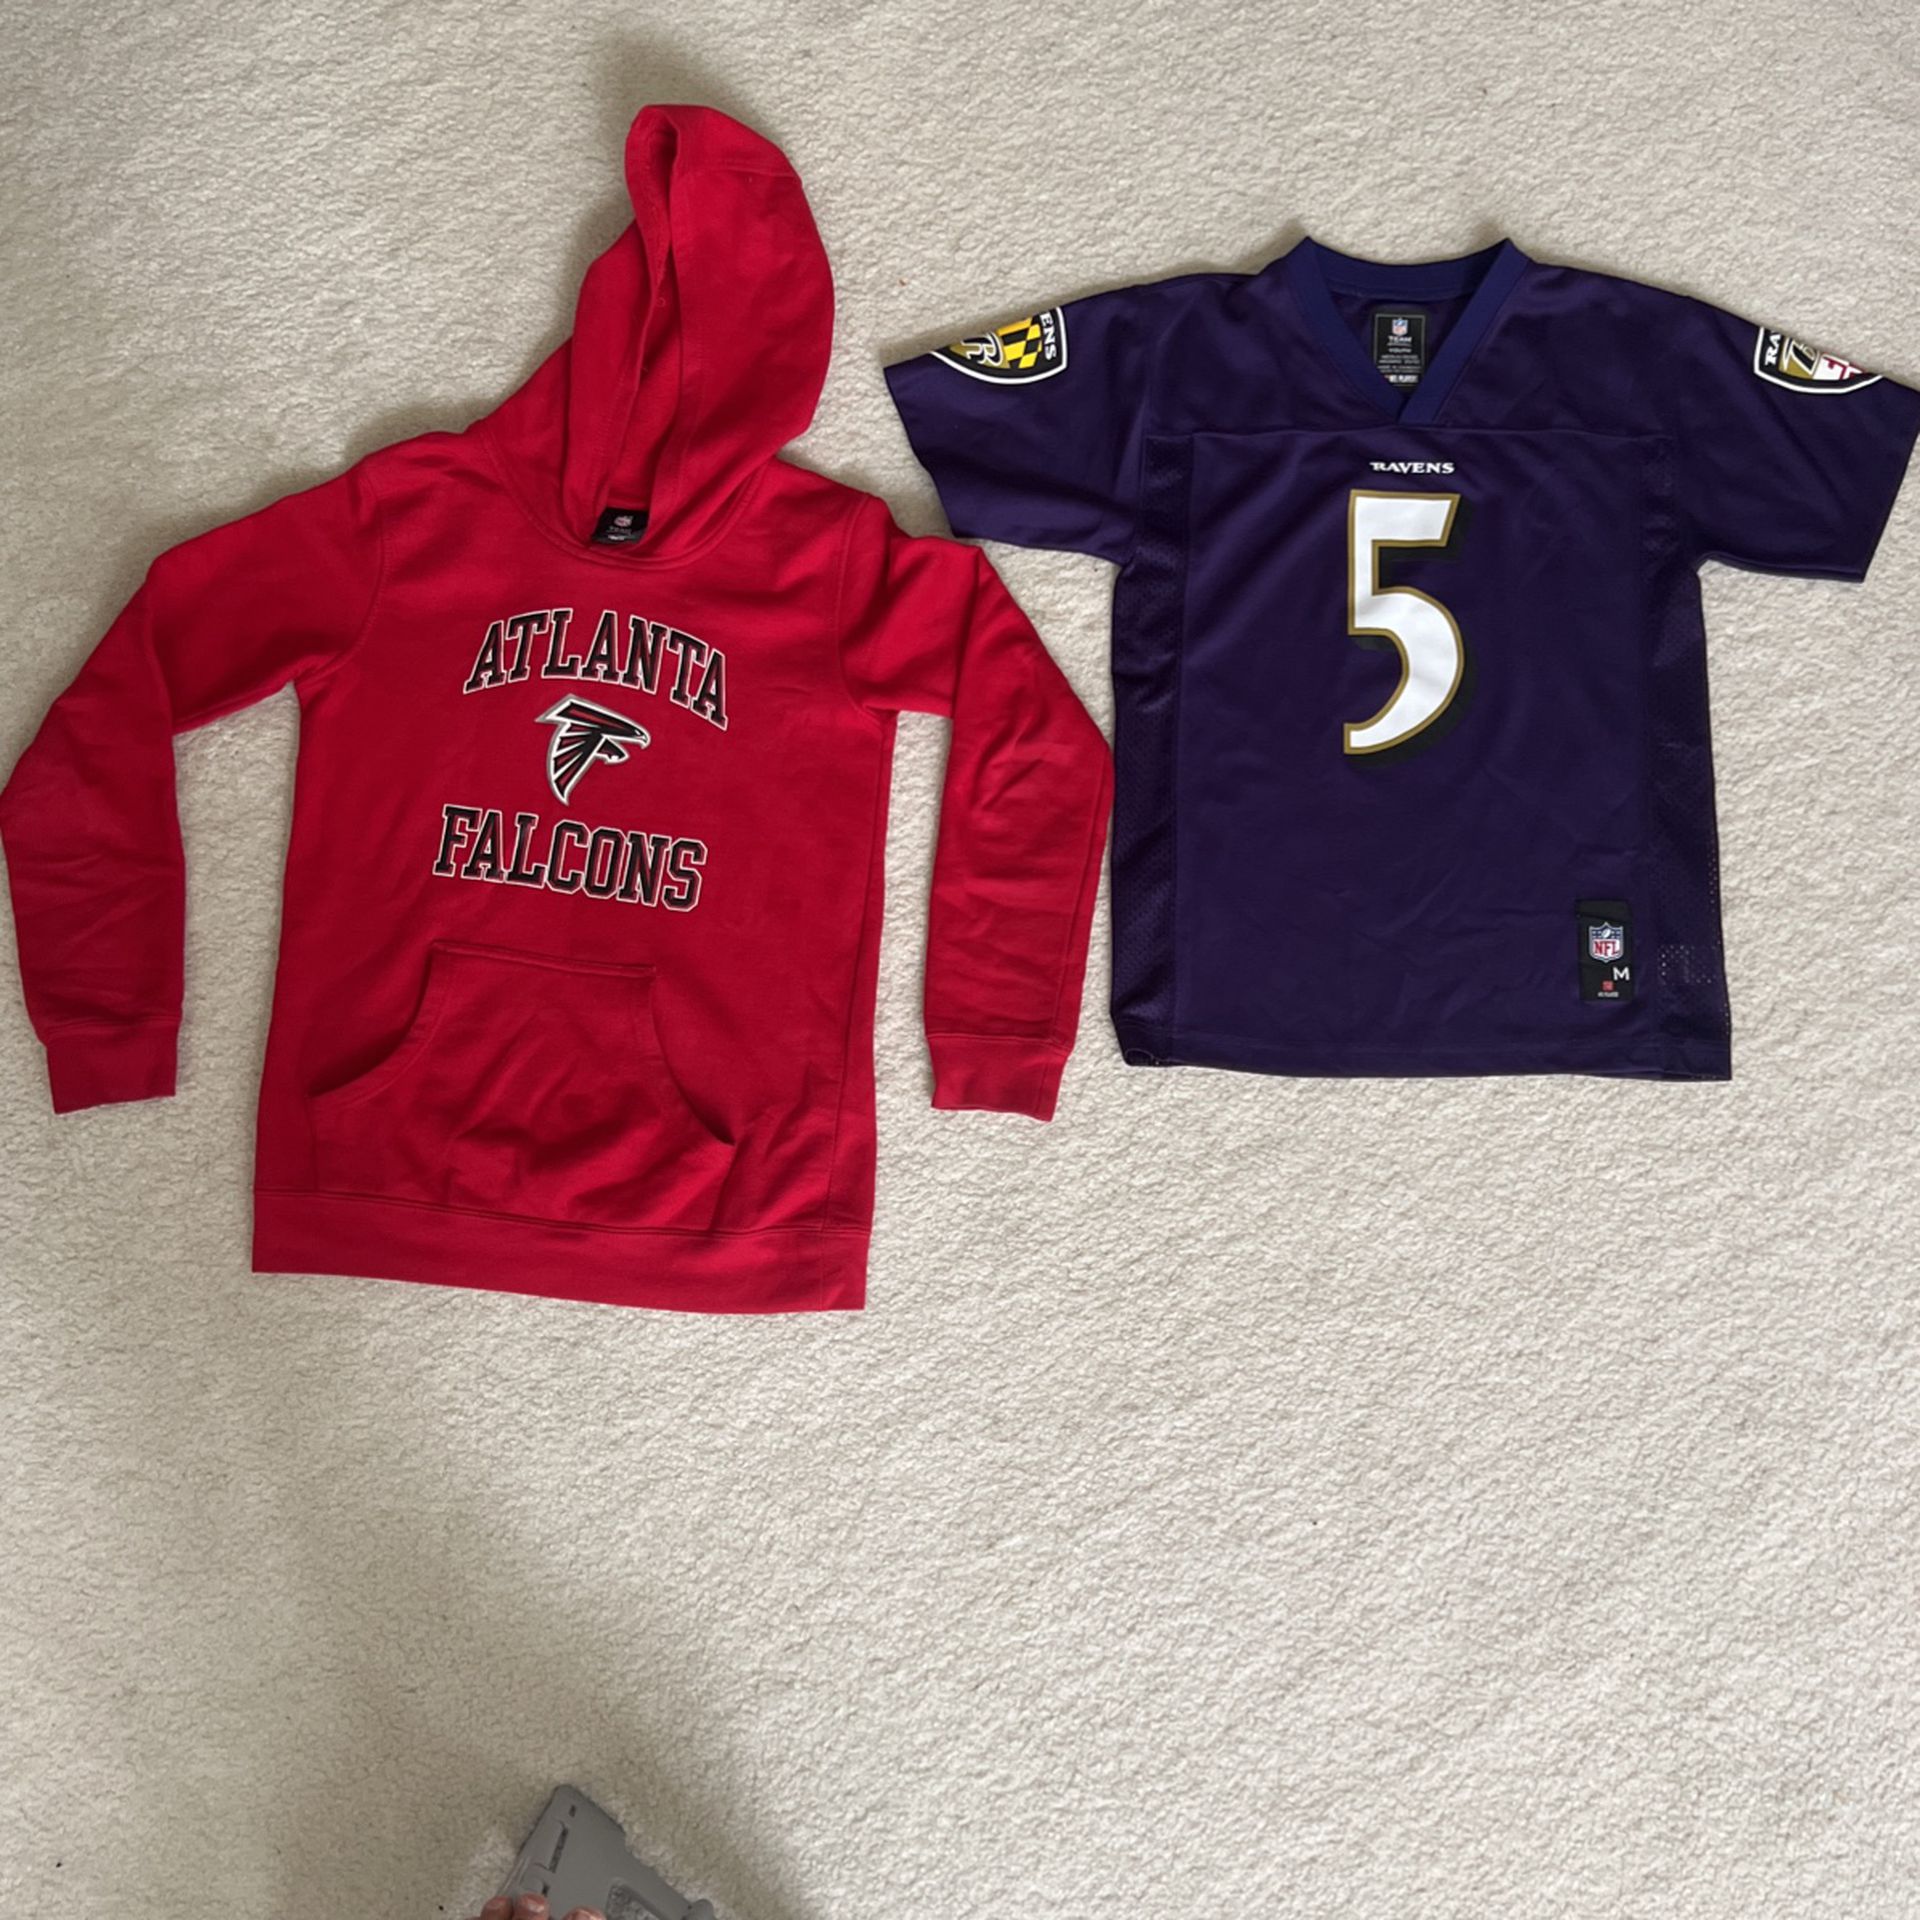 Boys NFL Youth Medium (10-12 yrs ) Clothes . Official NFL Brand. Excellent Condition .